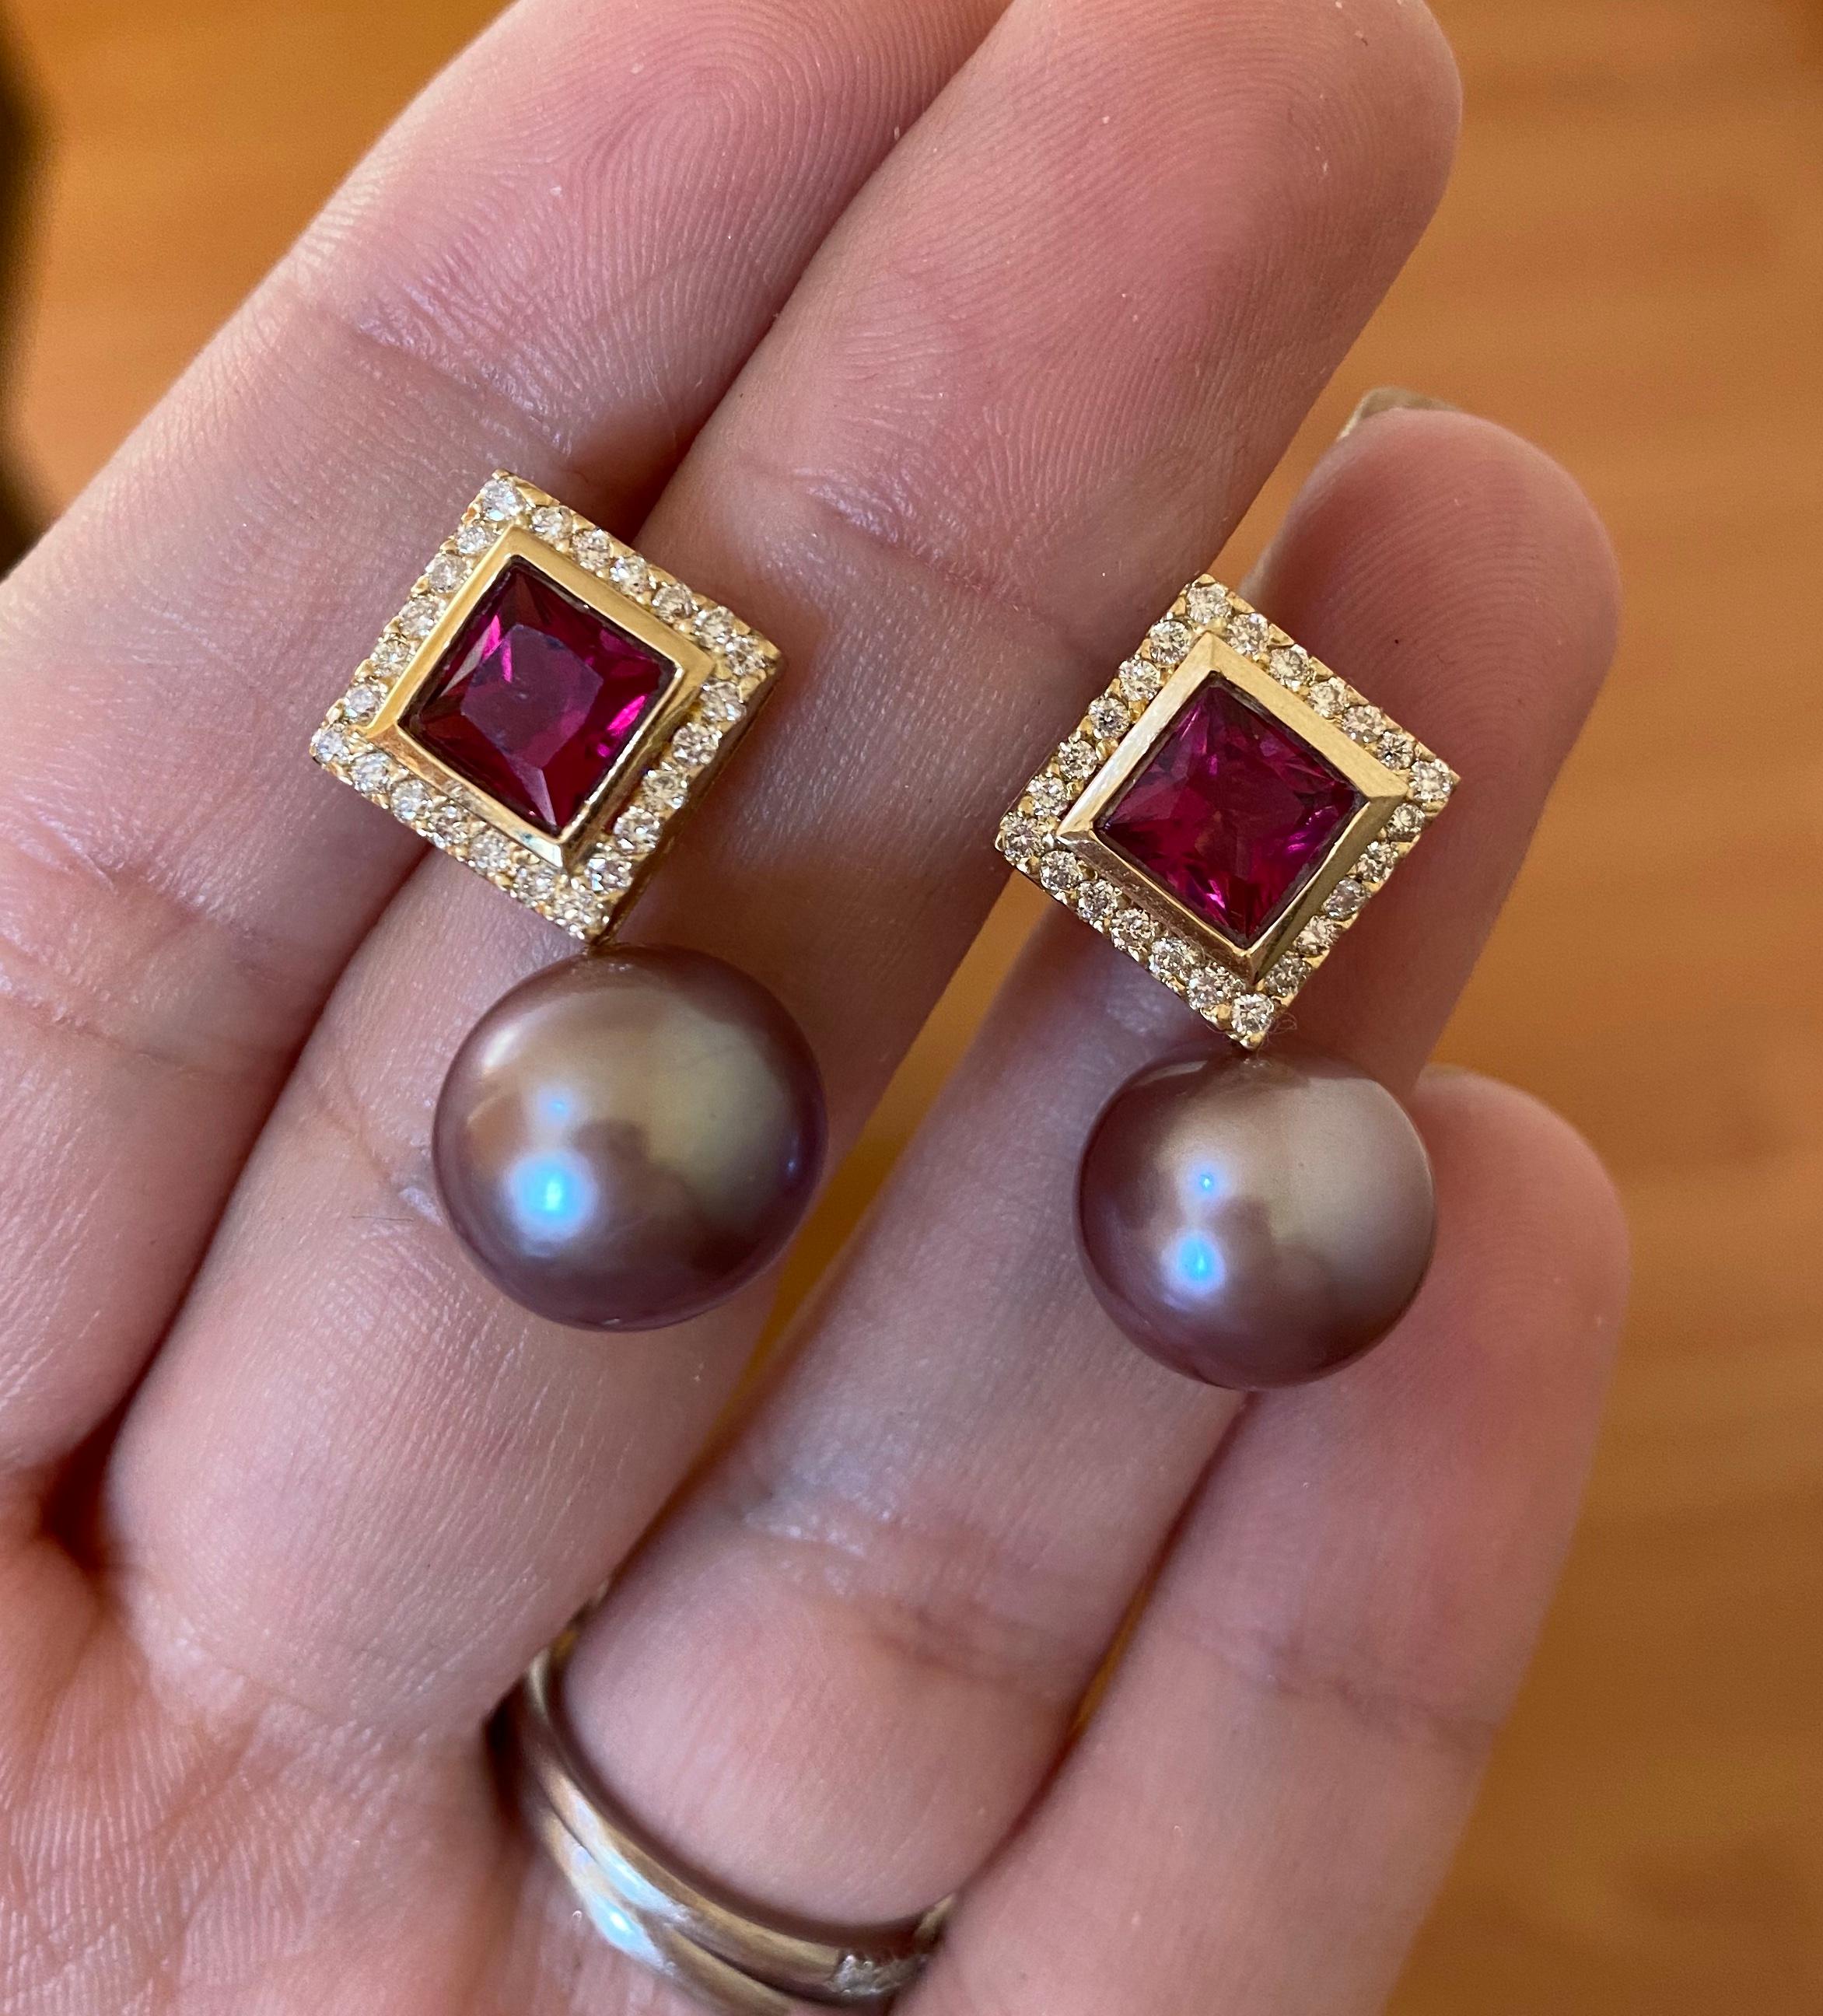 Princess Cut 2.40cts Rubellite diamond lilac pearl earrings, 18K gold, by Michelle Massoura For Sale